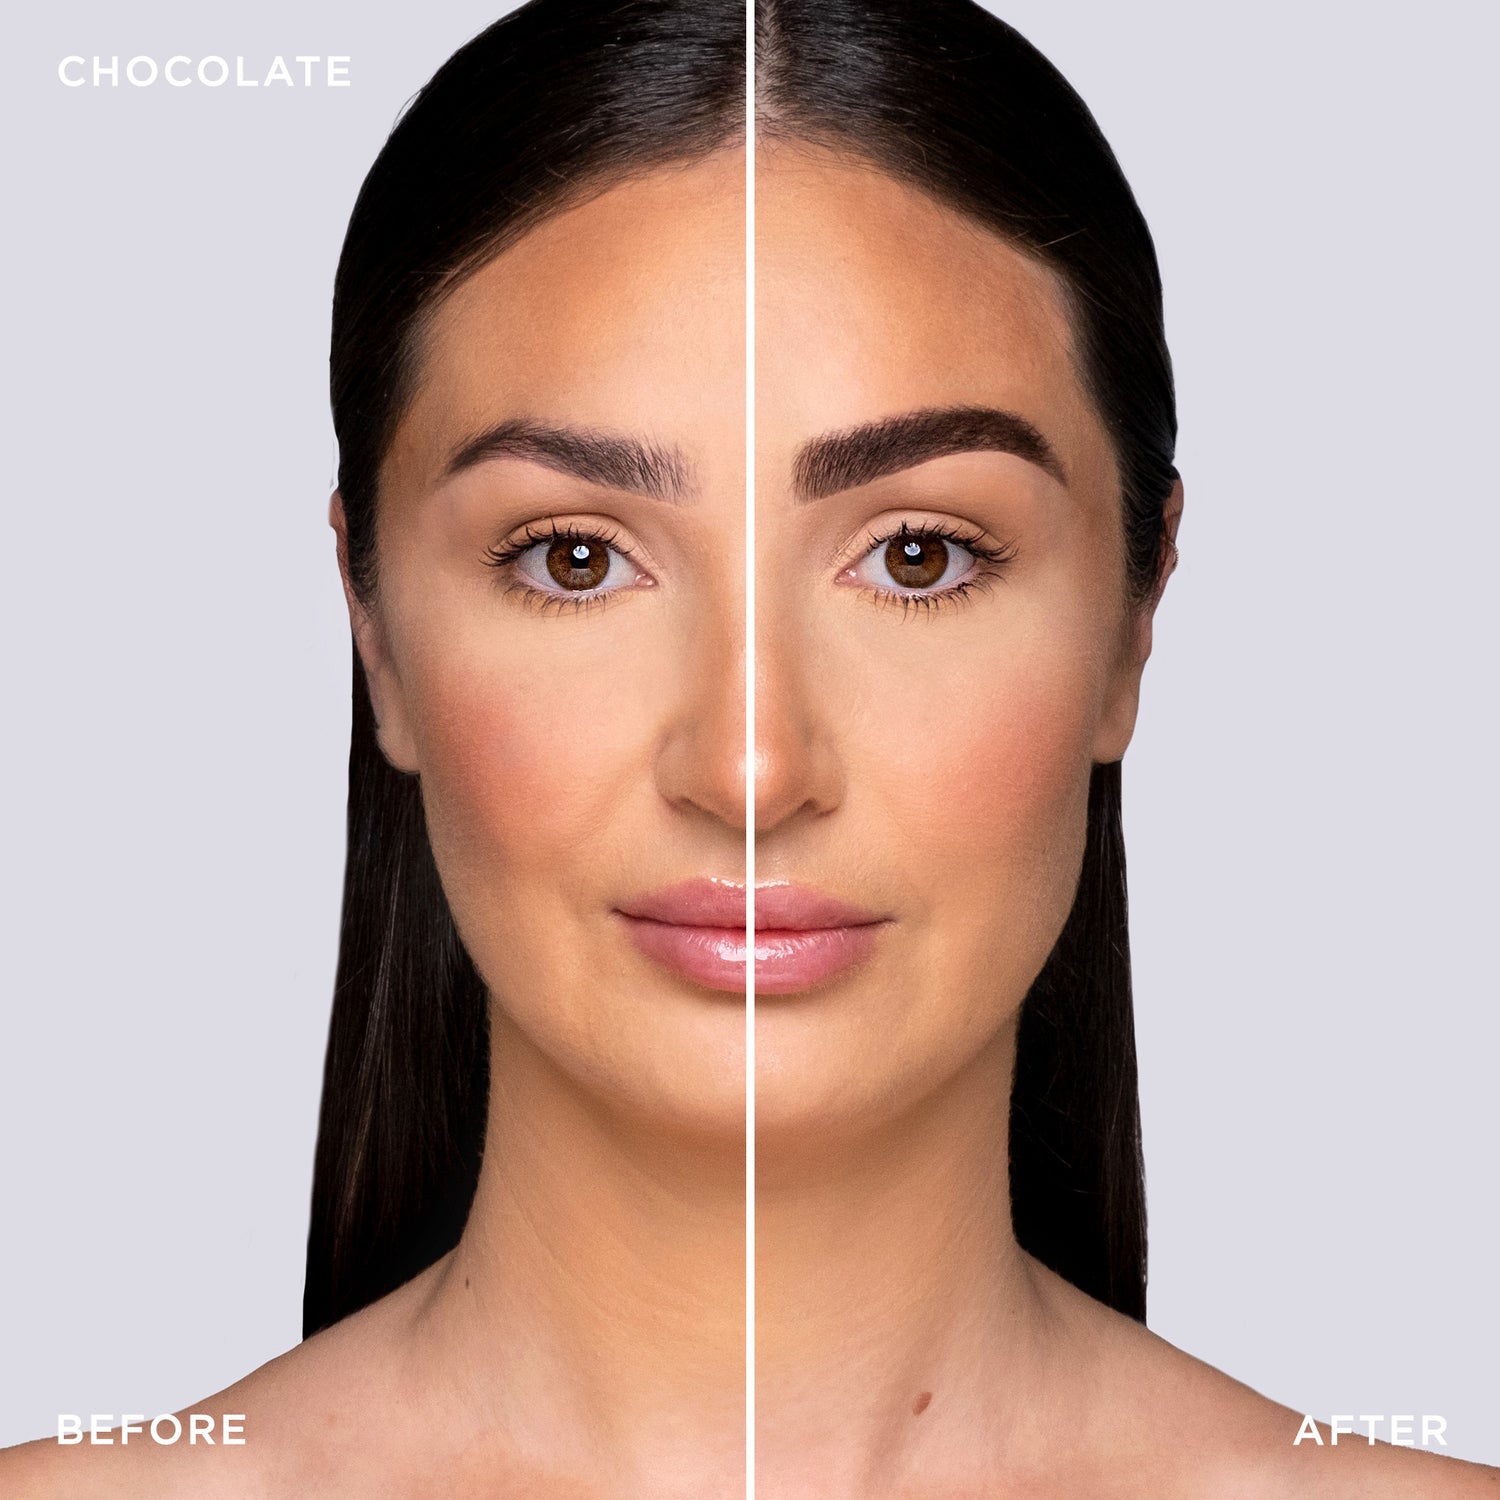 Before and after shot of model wearing Tinted Multi-Peptide Brow Gel - Chocolate